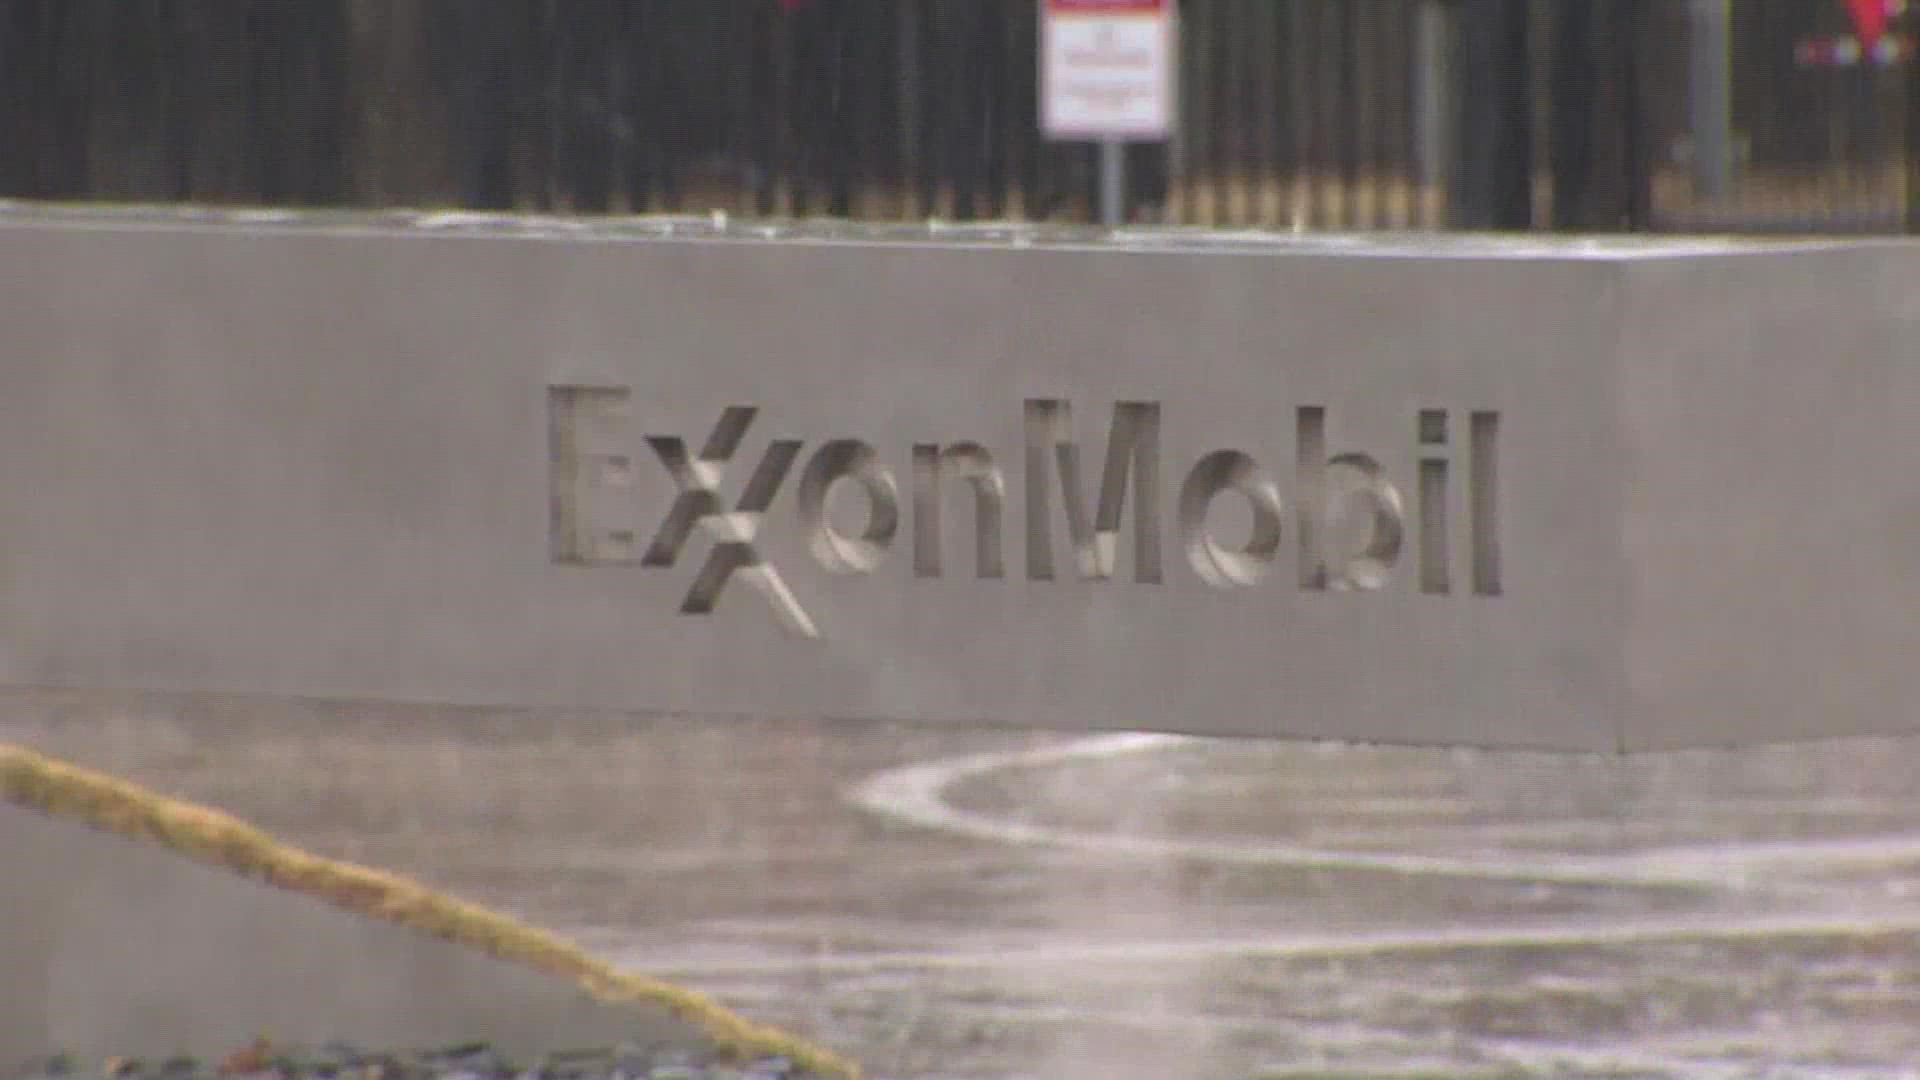 ExxonMobil says the move from Irving to the Houston area will be completed mid-year 2023.